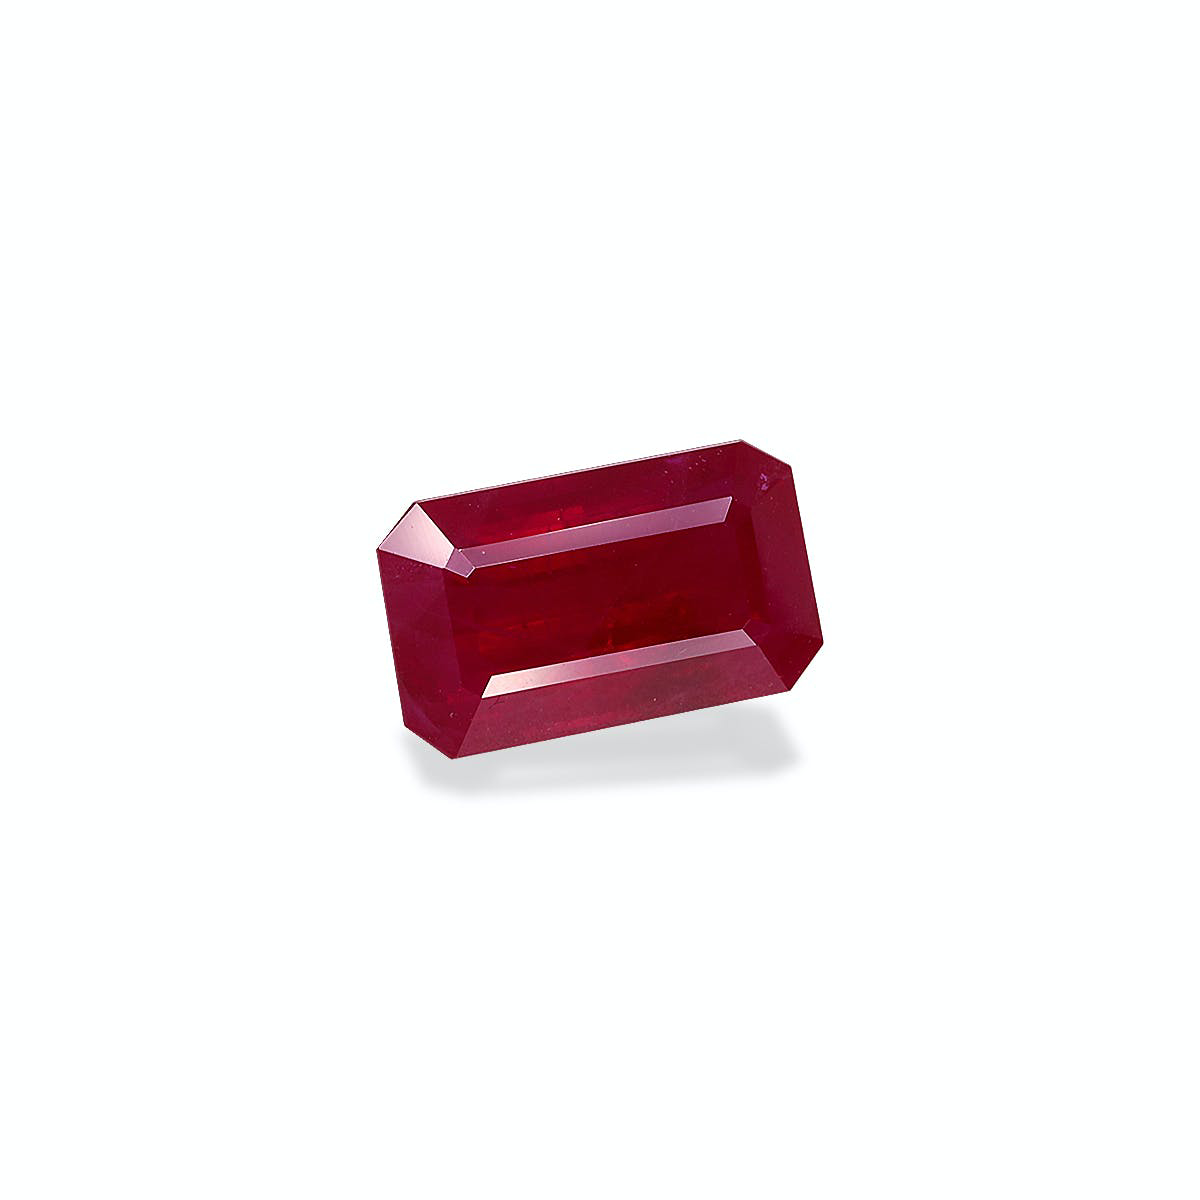 Picture of Red Burma Ruby 3.07ct (WC1103-12)